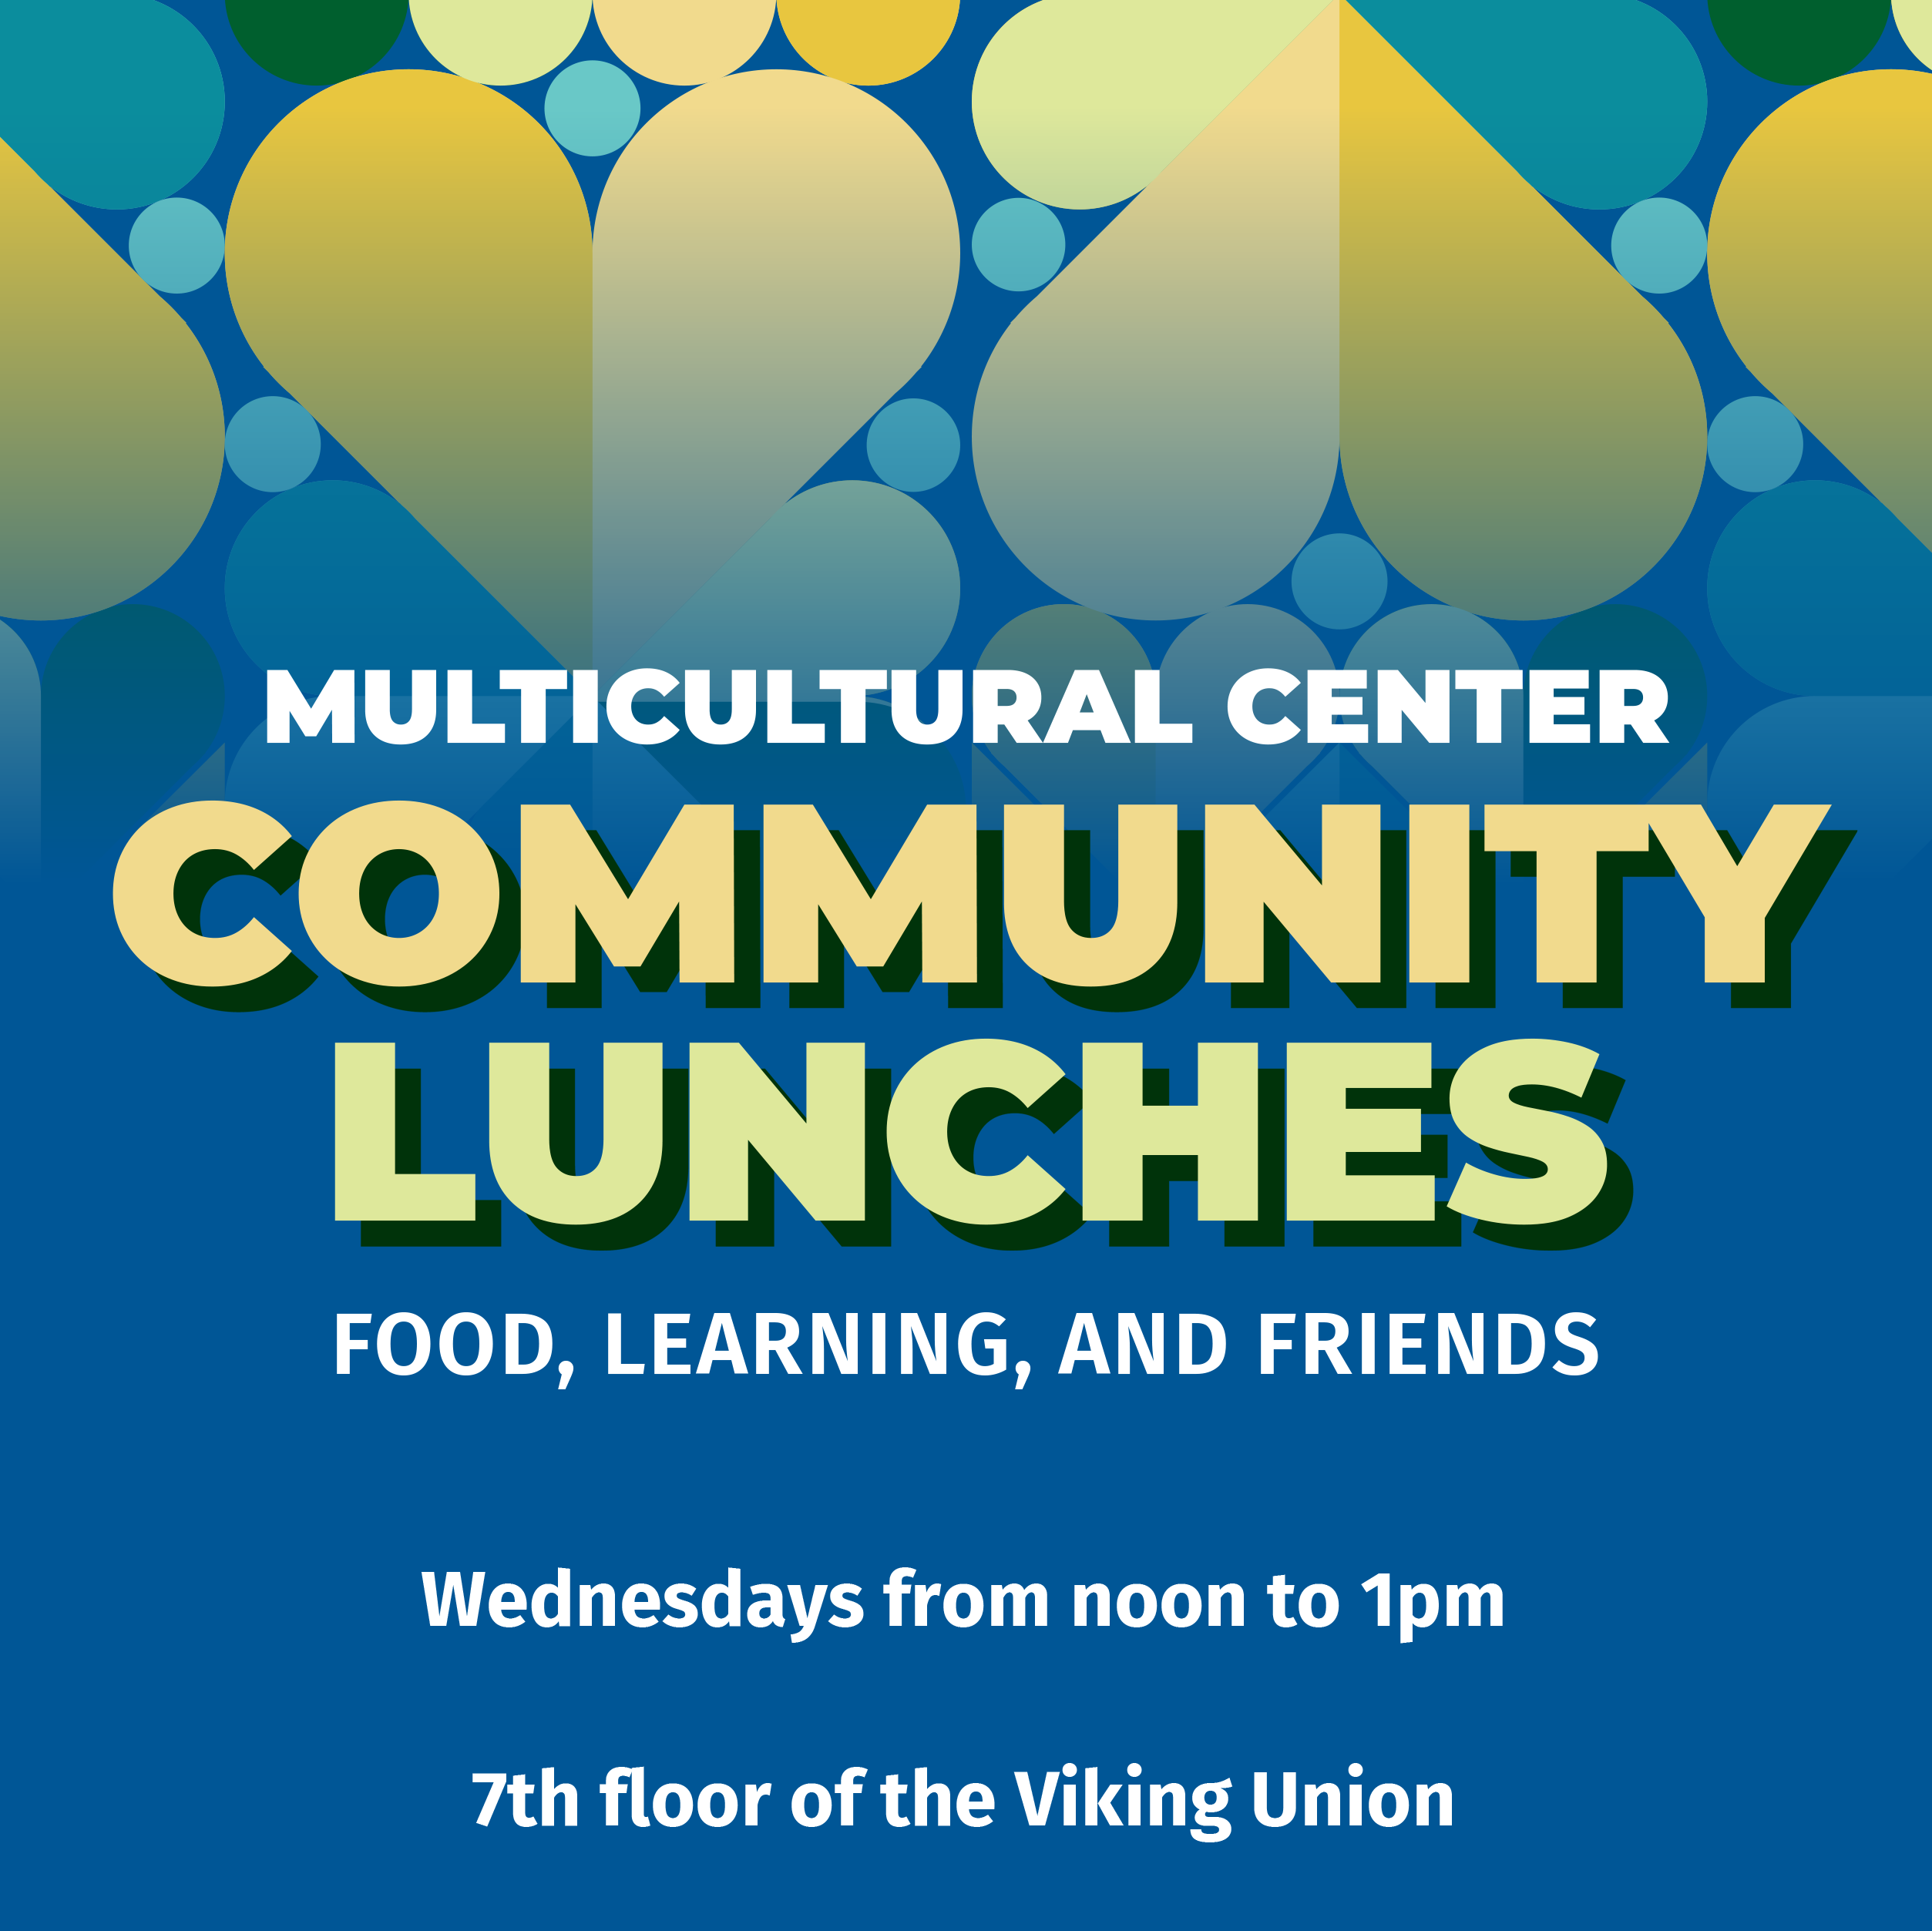 decorative flyer advertising Multicultural Center Community Lunches